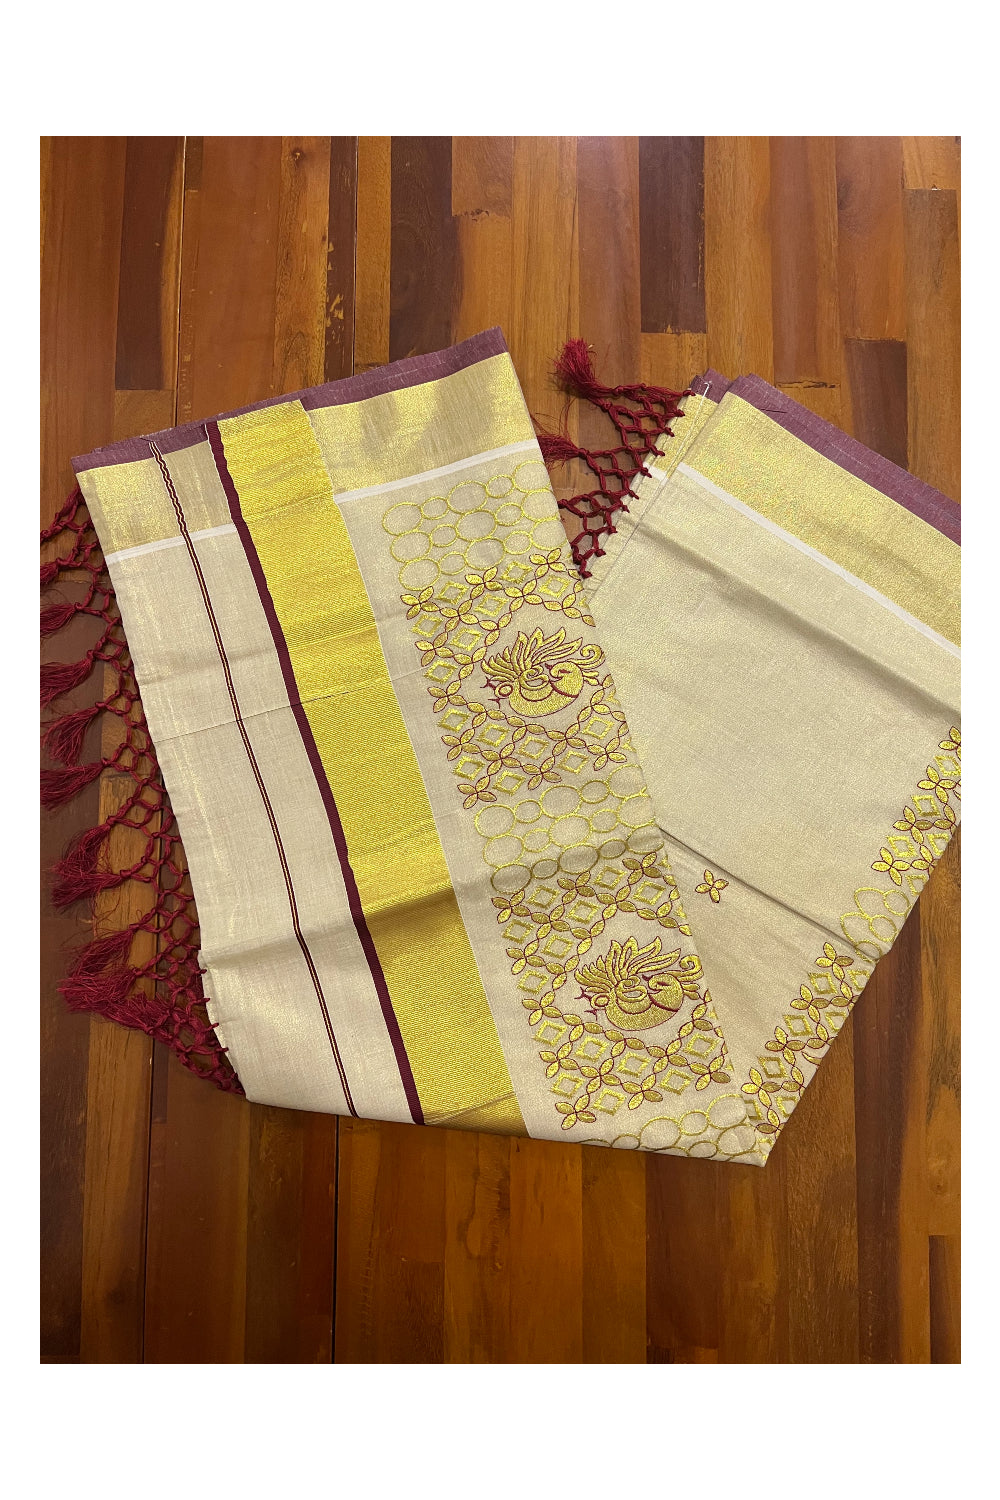 Kerala Tissue Kasavu Heavy Work Saree with Golden and Maroon Peacock Embroidery Design